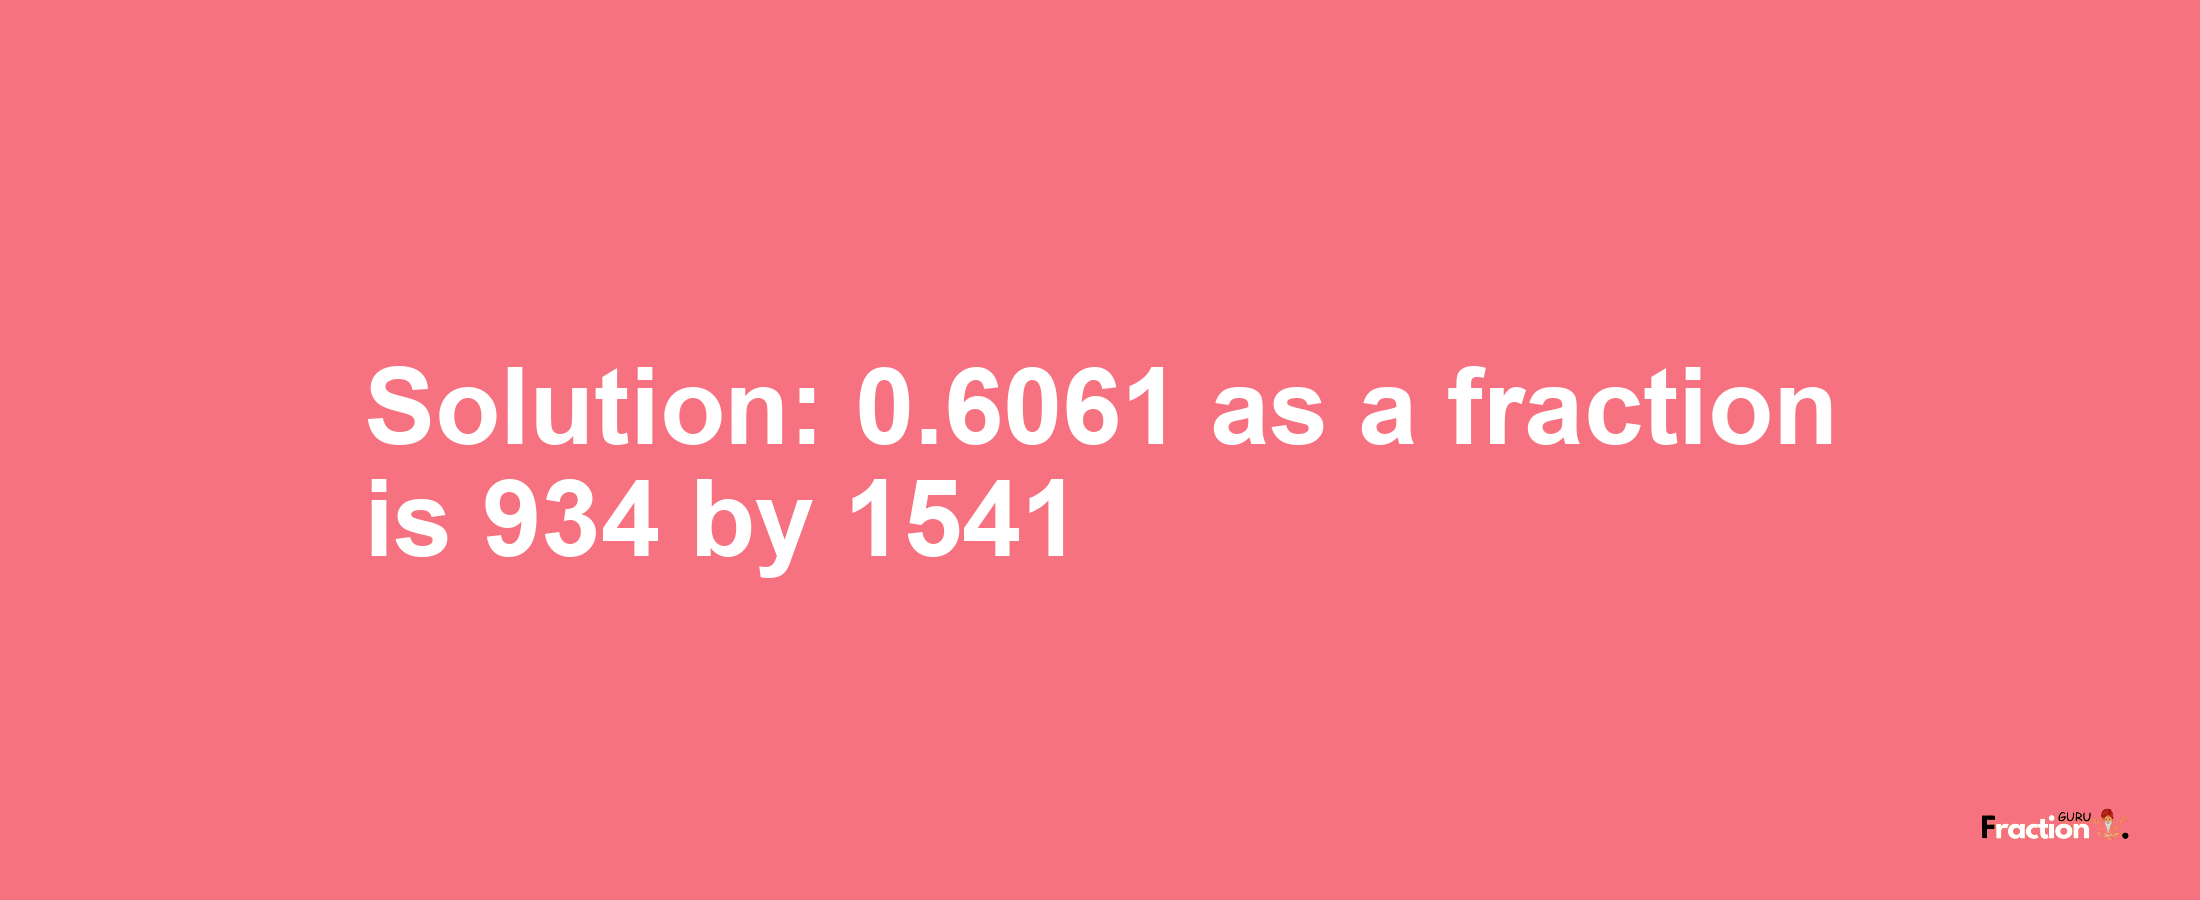 Solution:0.6061 as a fraction is 934/1541